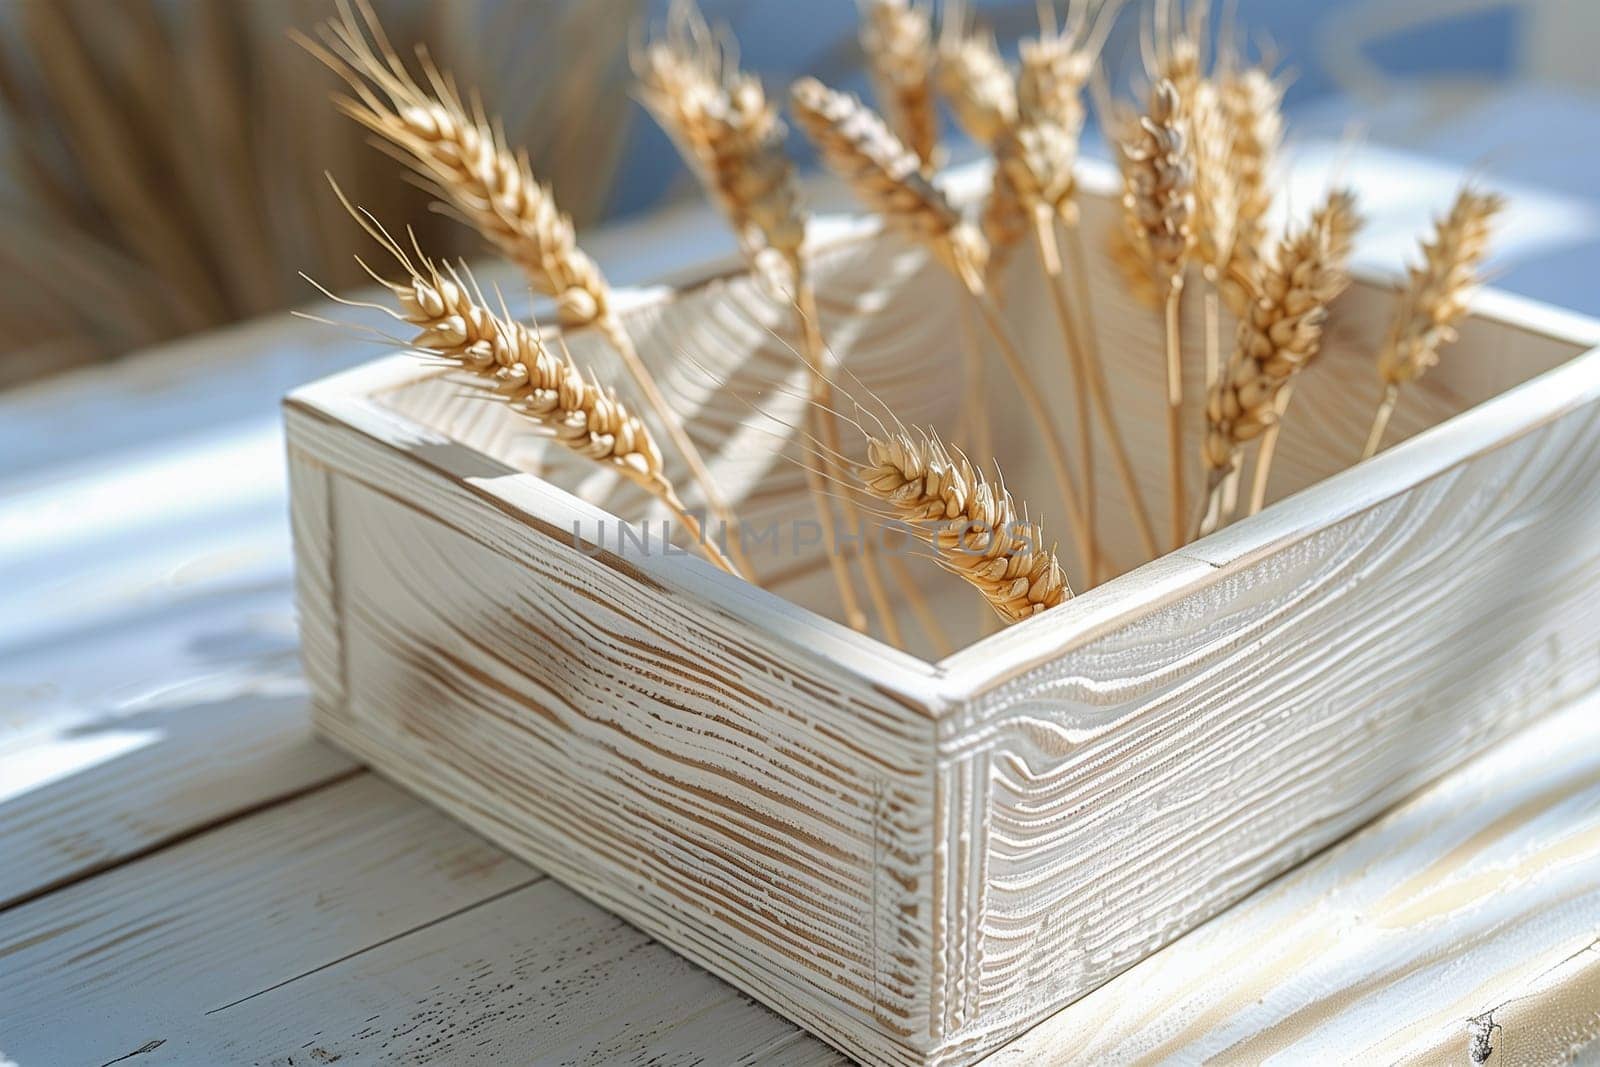 A wooden box filled with wheat grains is placed on a table.